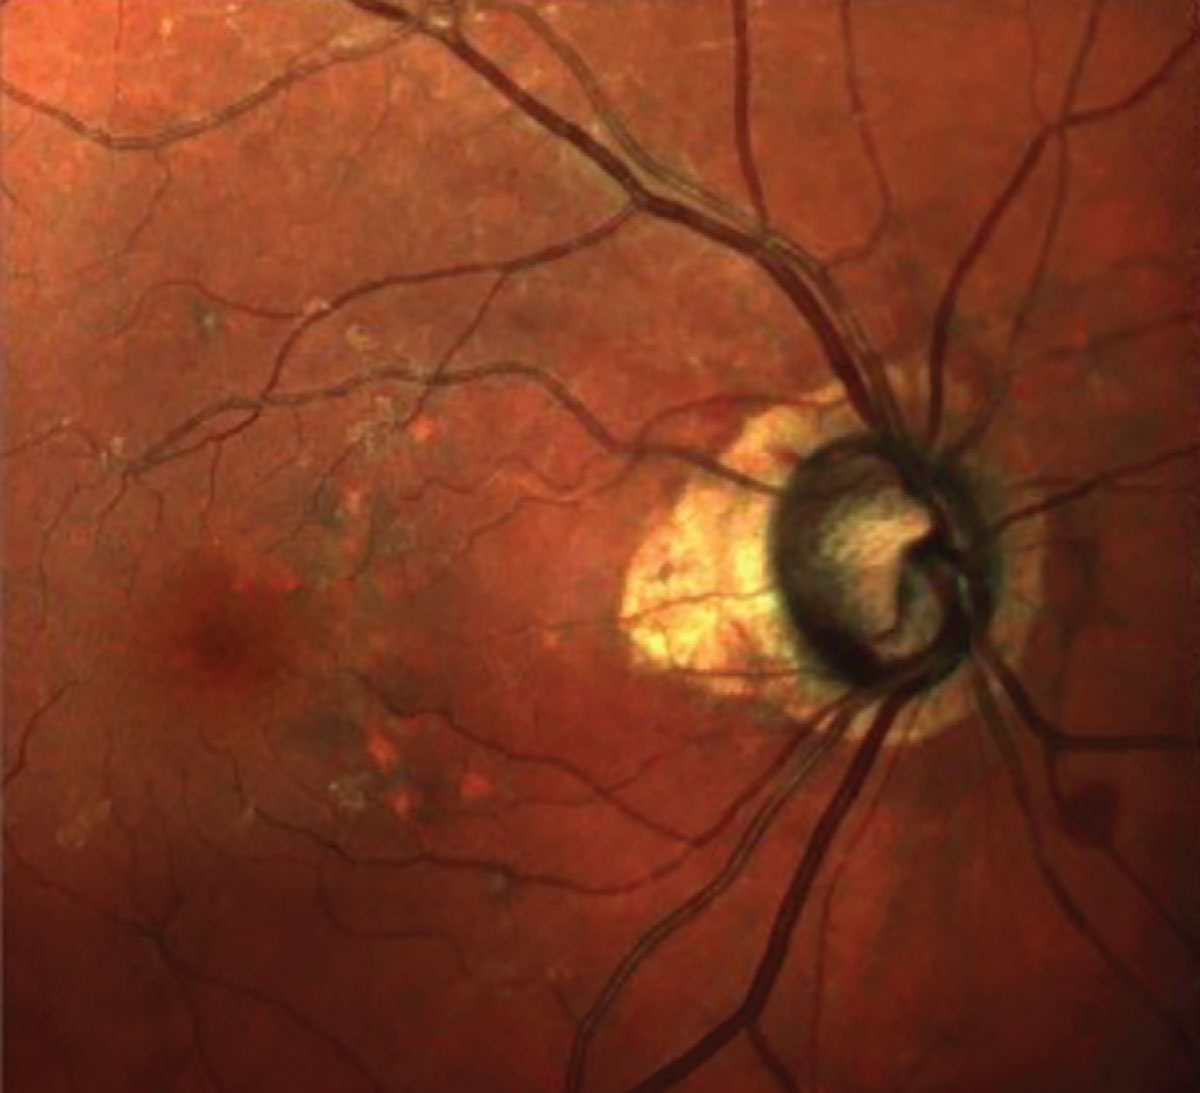 Fig. 1. Seen here is advanced glaucomatous optic neuropathy, peripapillary atrophy, retinal pigment epithelium changes in the macula and a diffuse epiretinal membrane.